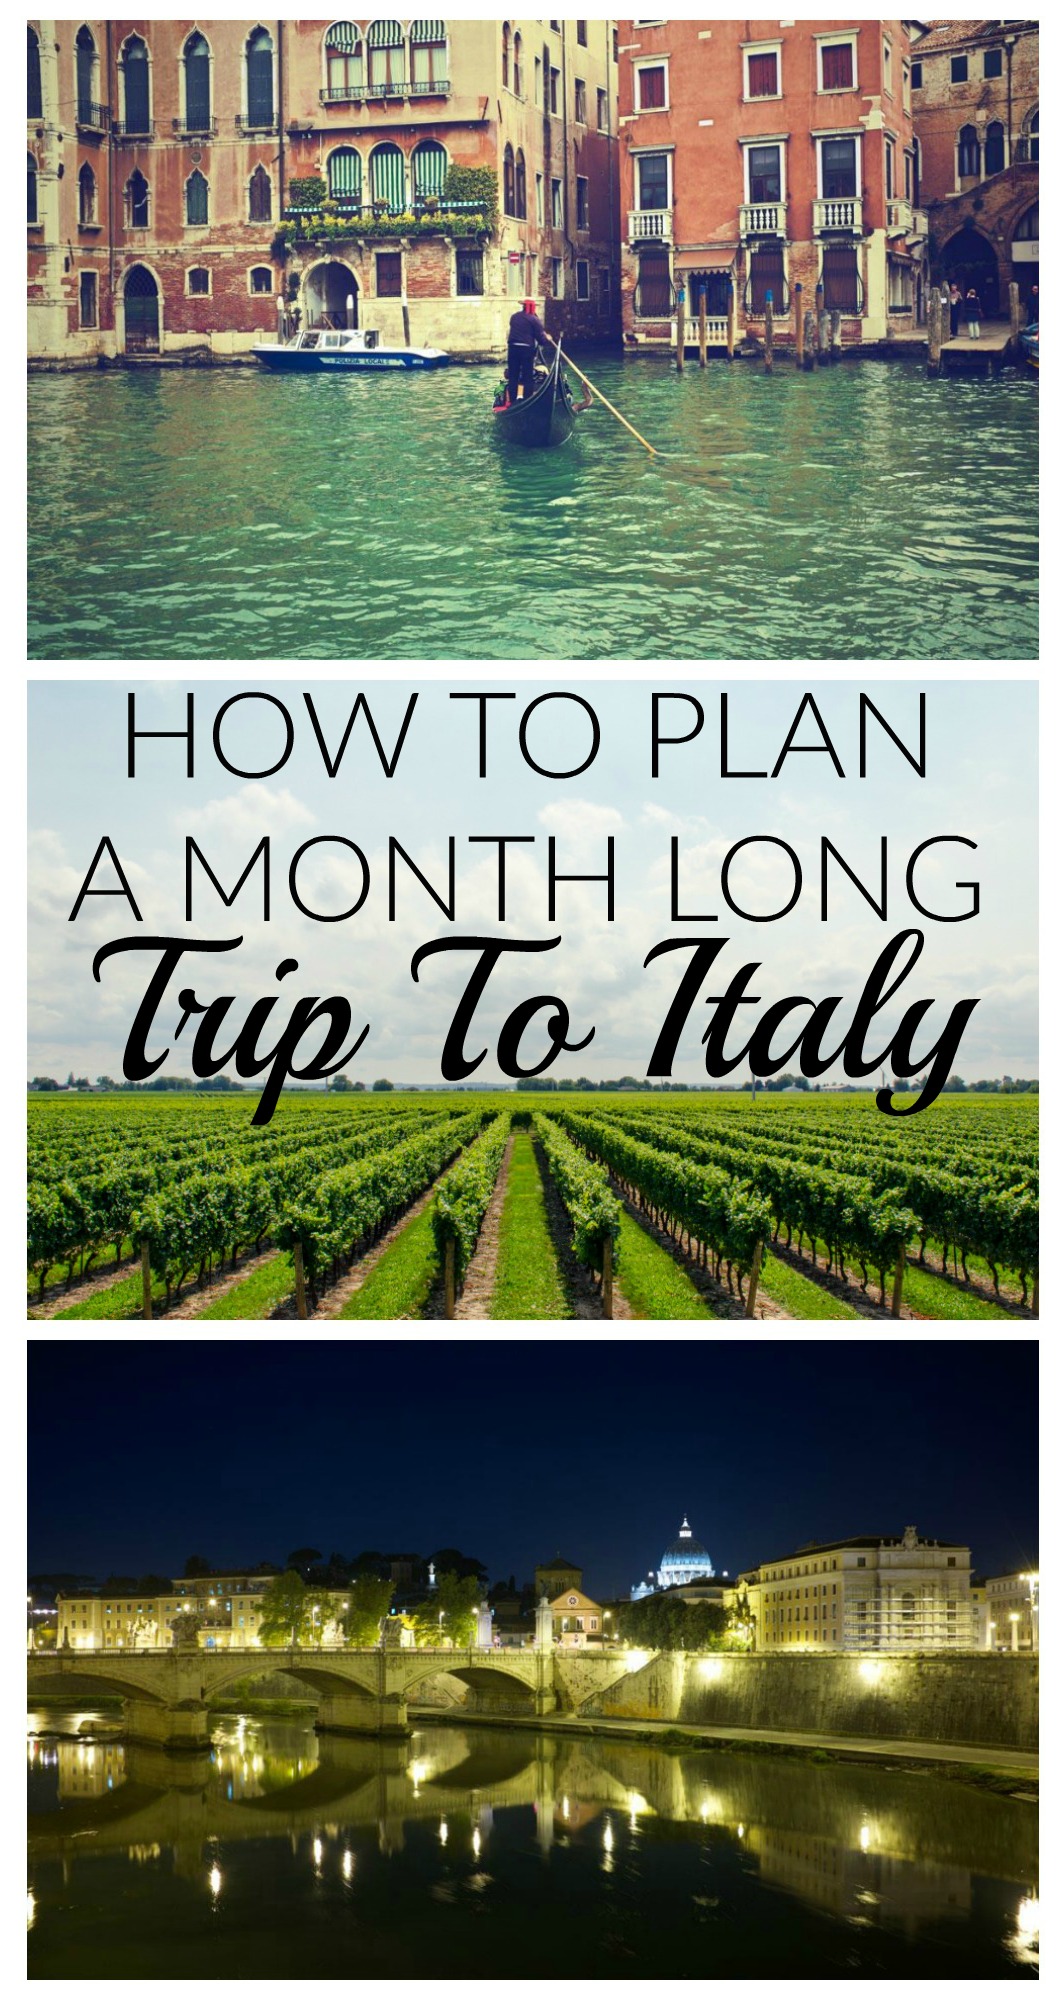 touring italy pinterest pic layout 2.jpg